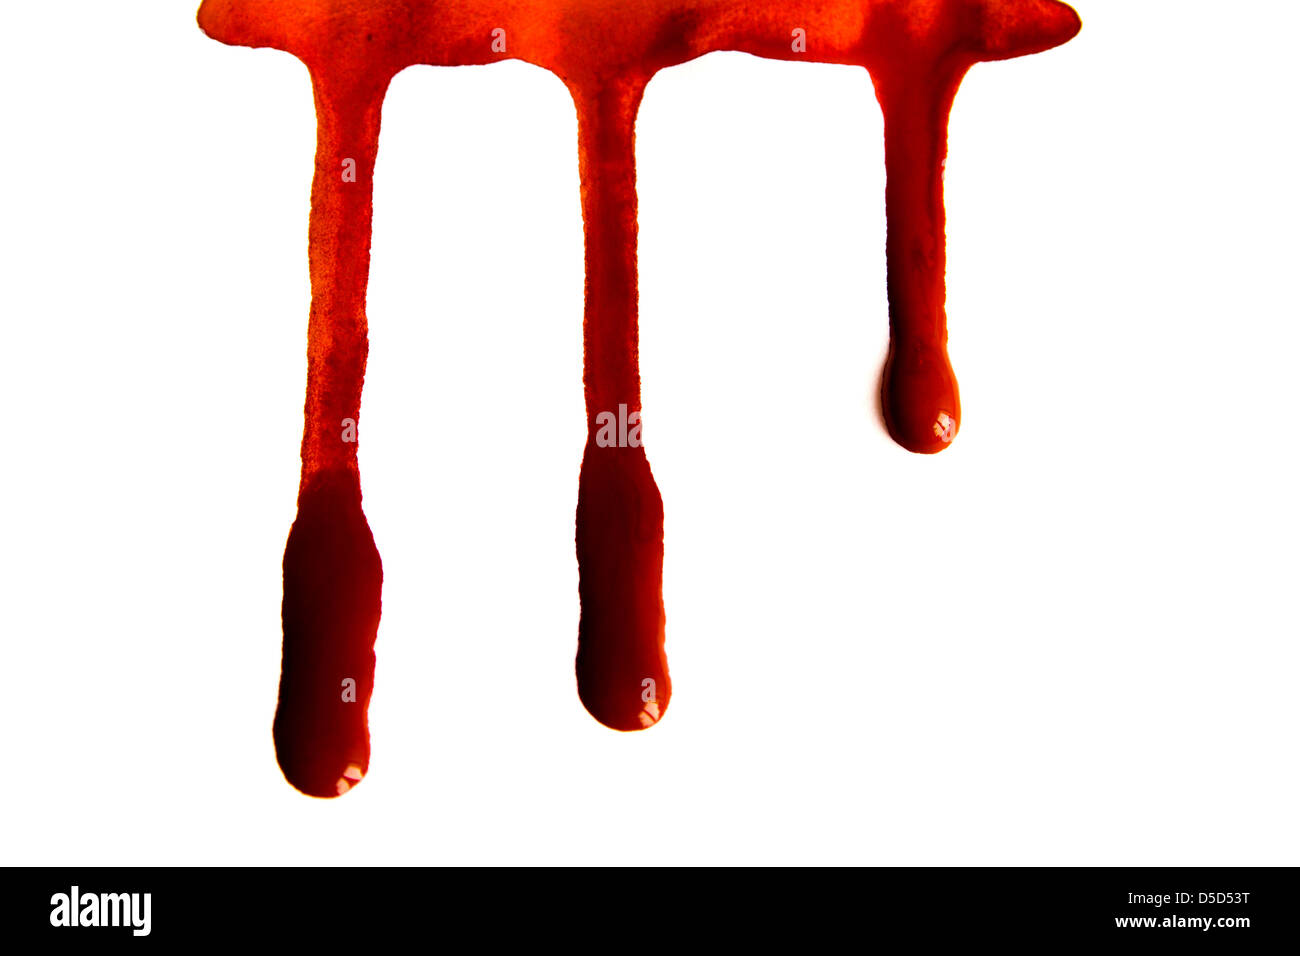 Blood stains isolated on white background Stock Photo